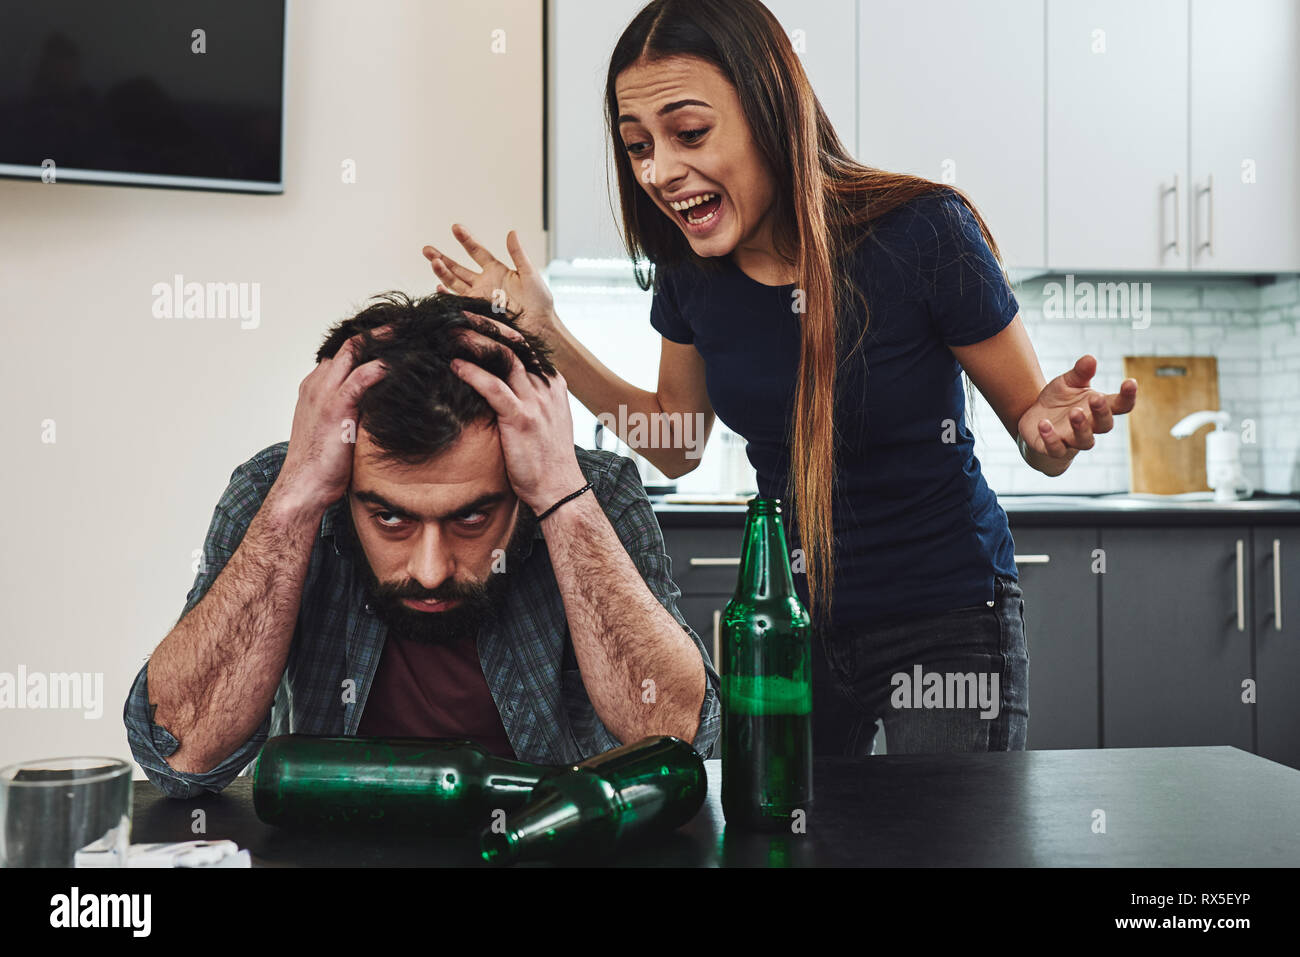 Drunk husband. Dark-haired addicted woman feeling despair while shouting at her drunk husband sitting in the kitchen. Empty bottles are on the table Stock Photo